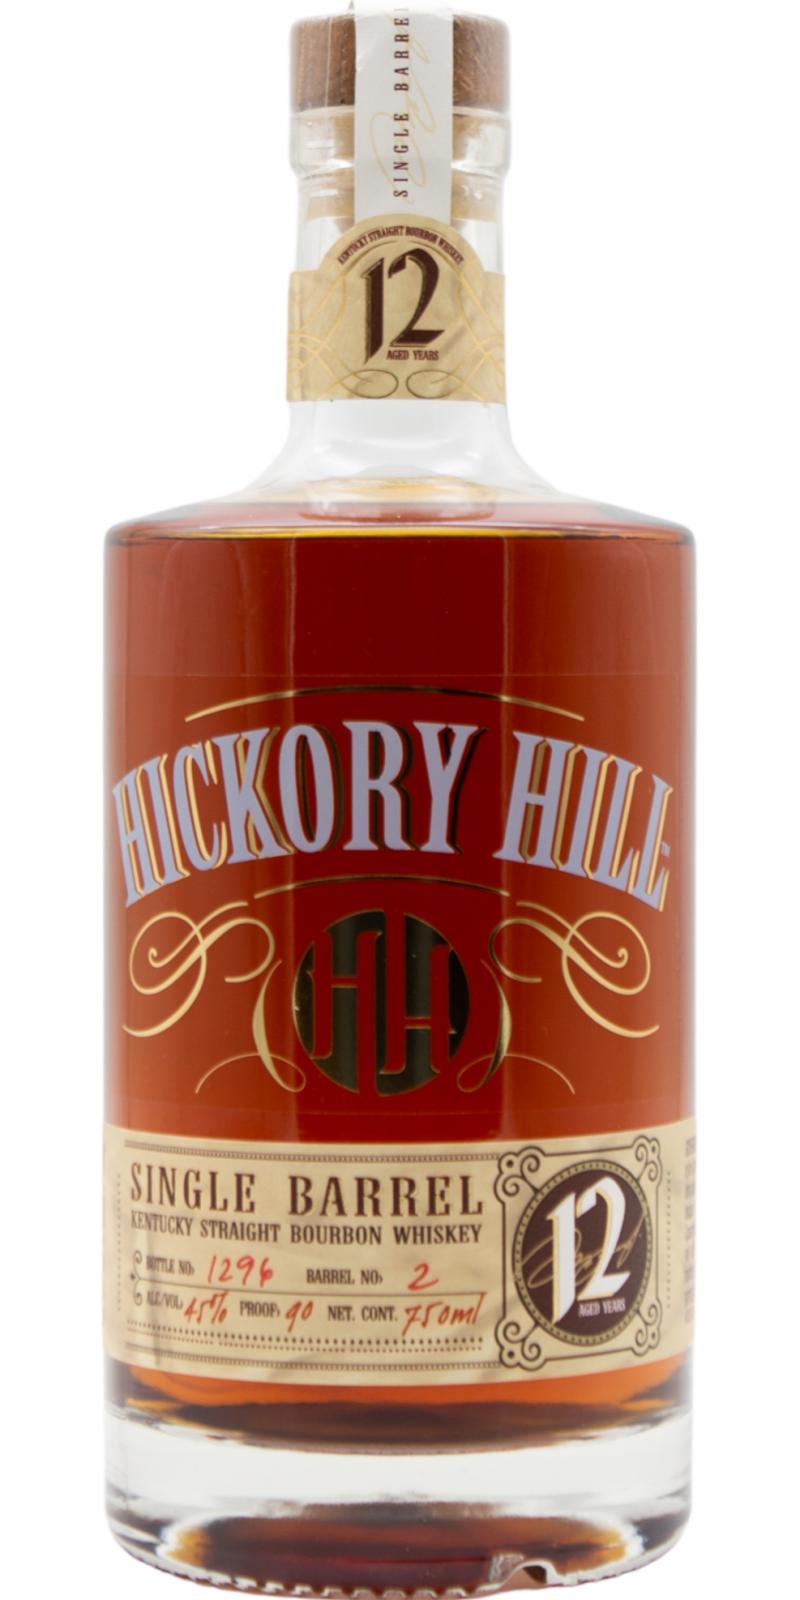 Hickory Hill 12-year-old